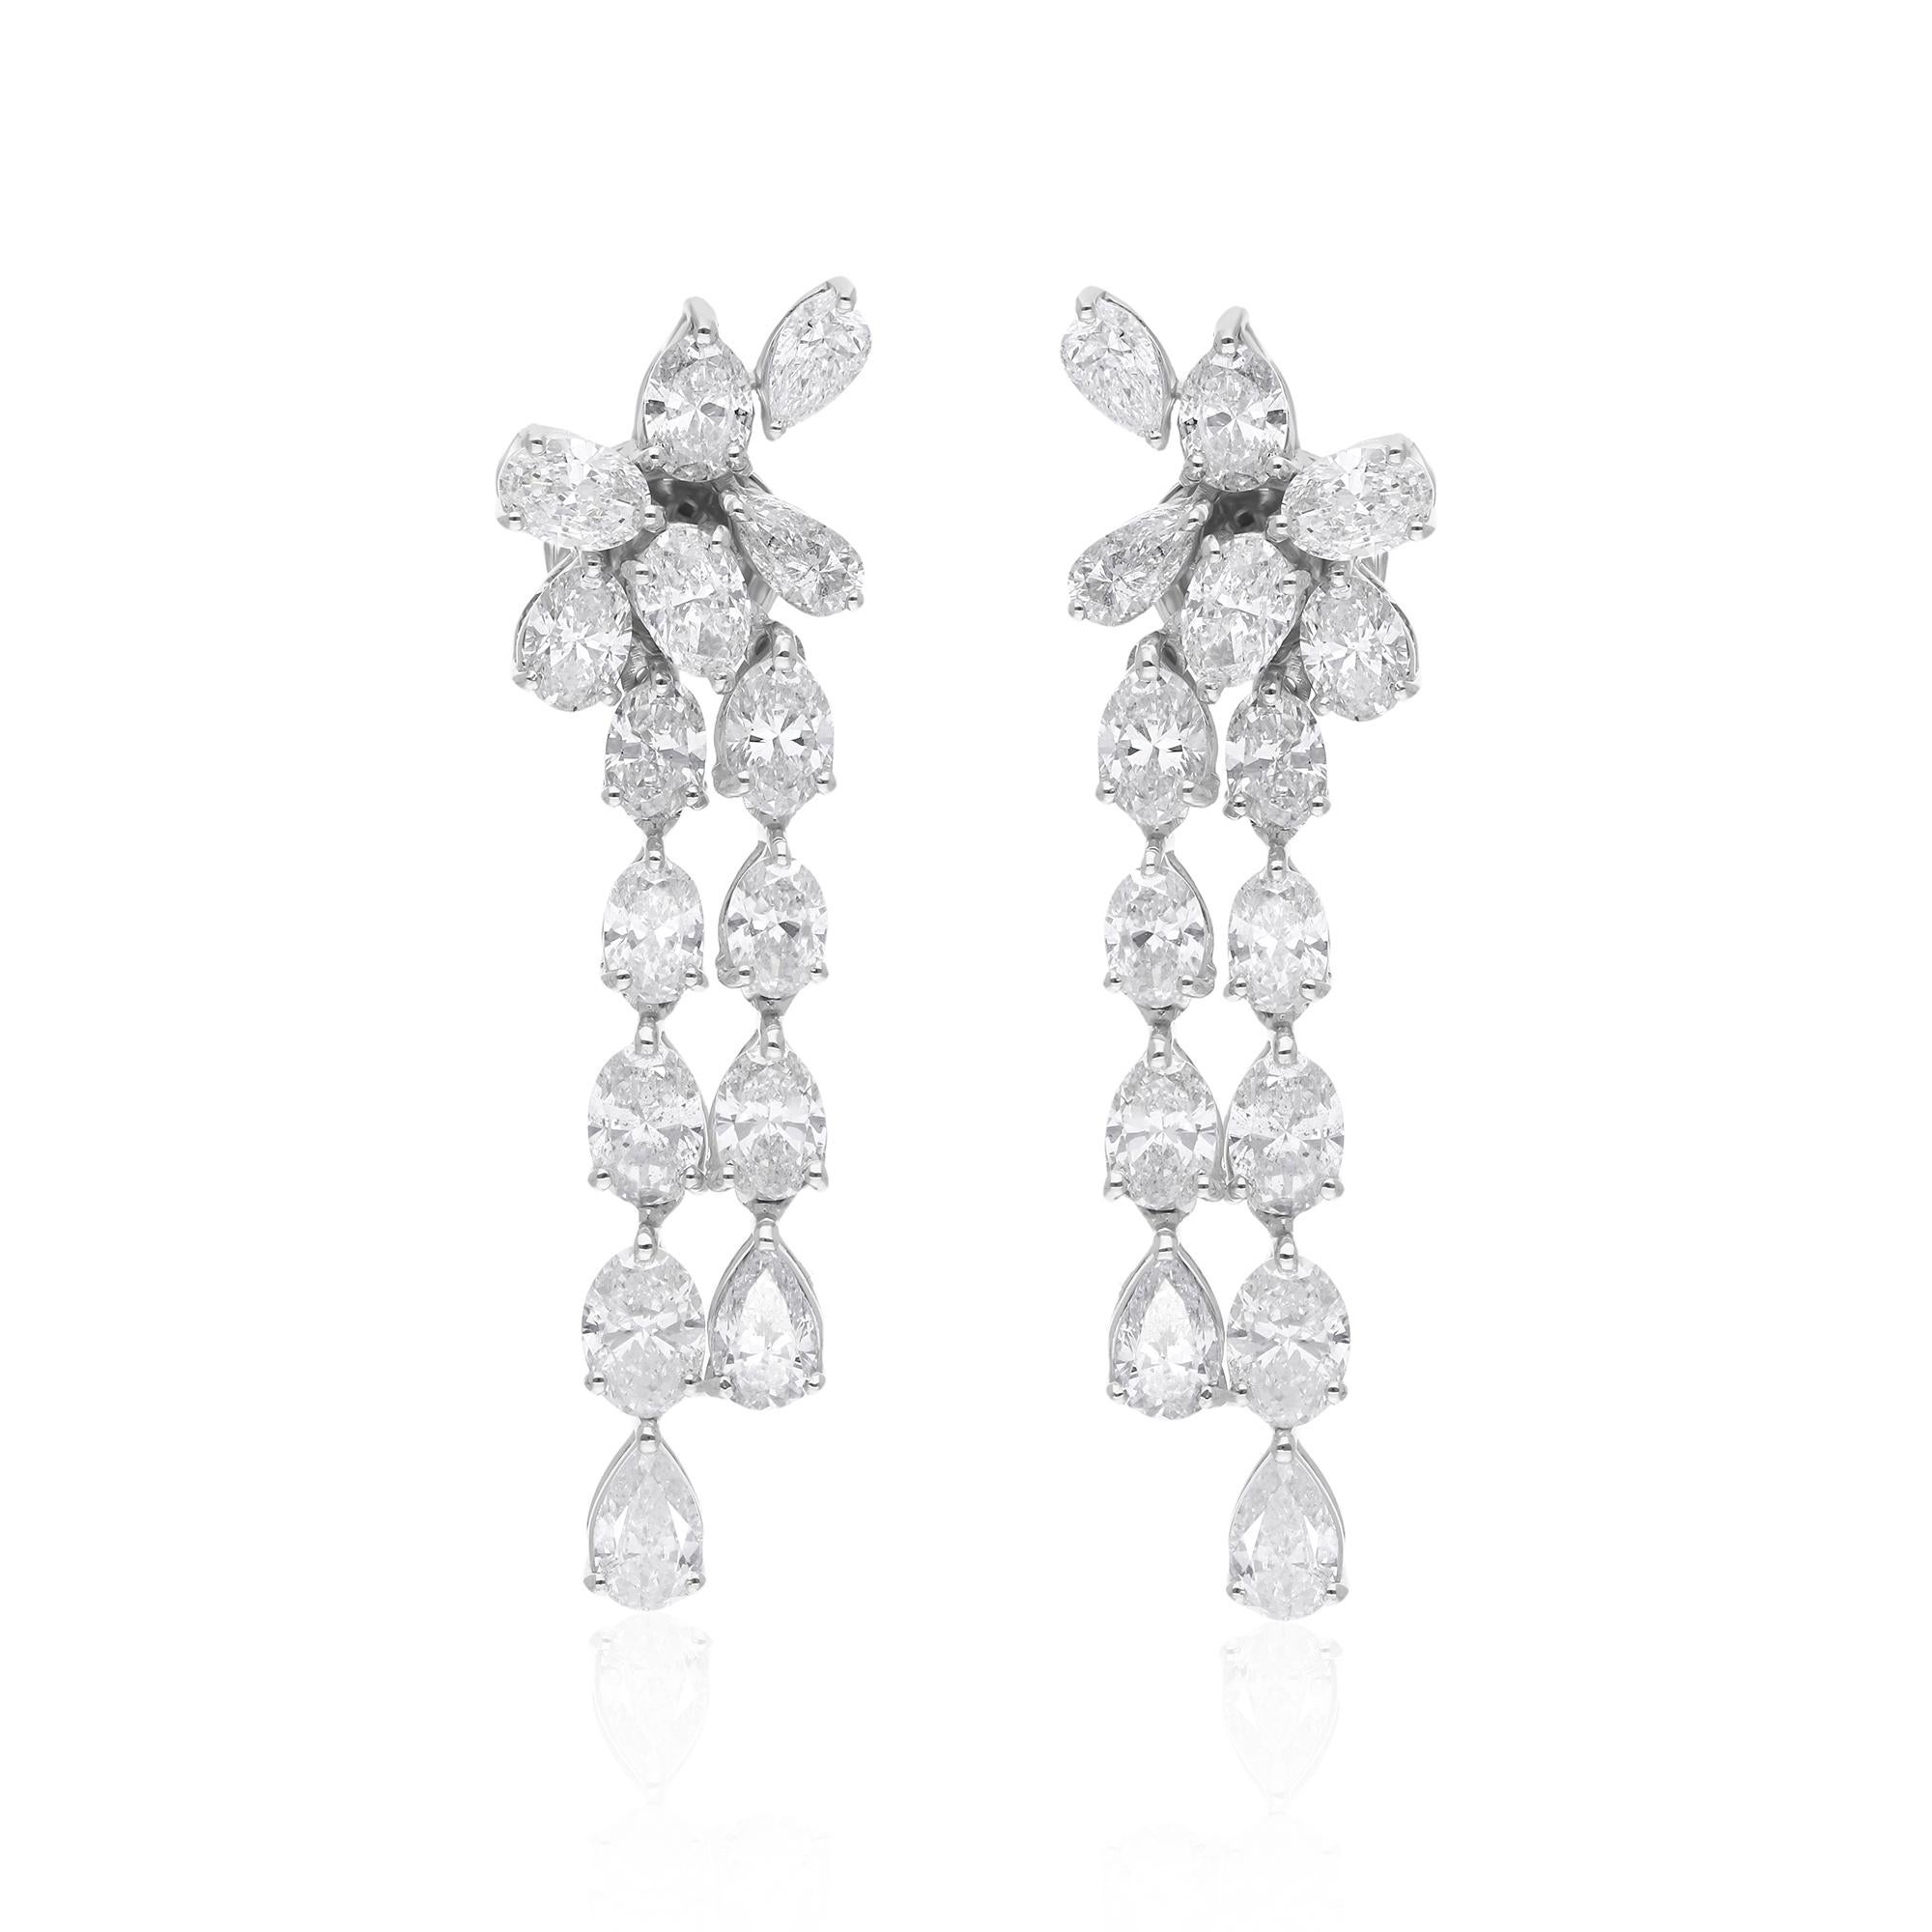 Crafted with the utmost precision and attention to detail, these earrings are a testament to fine craftsmanship and exceptional quality. The 18 Karat White Gold setting adds a touch of refinement, providing the perfect backdrop to showcase the